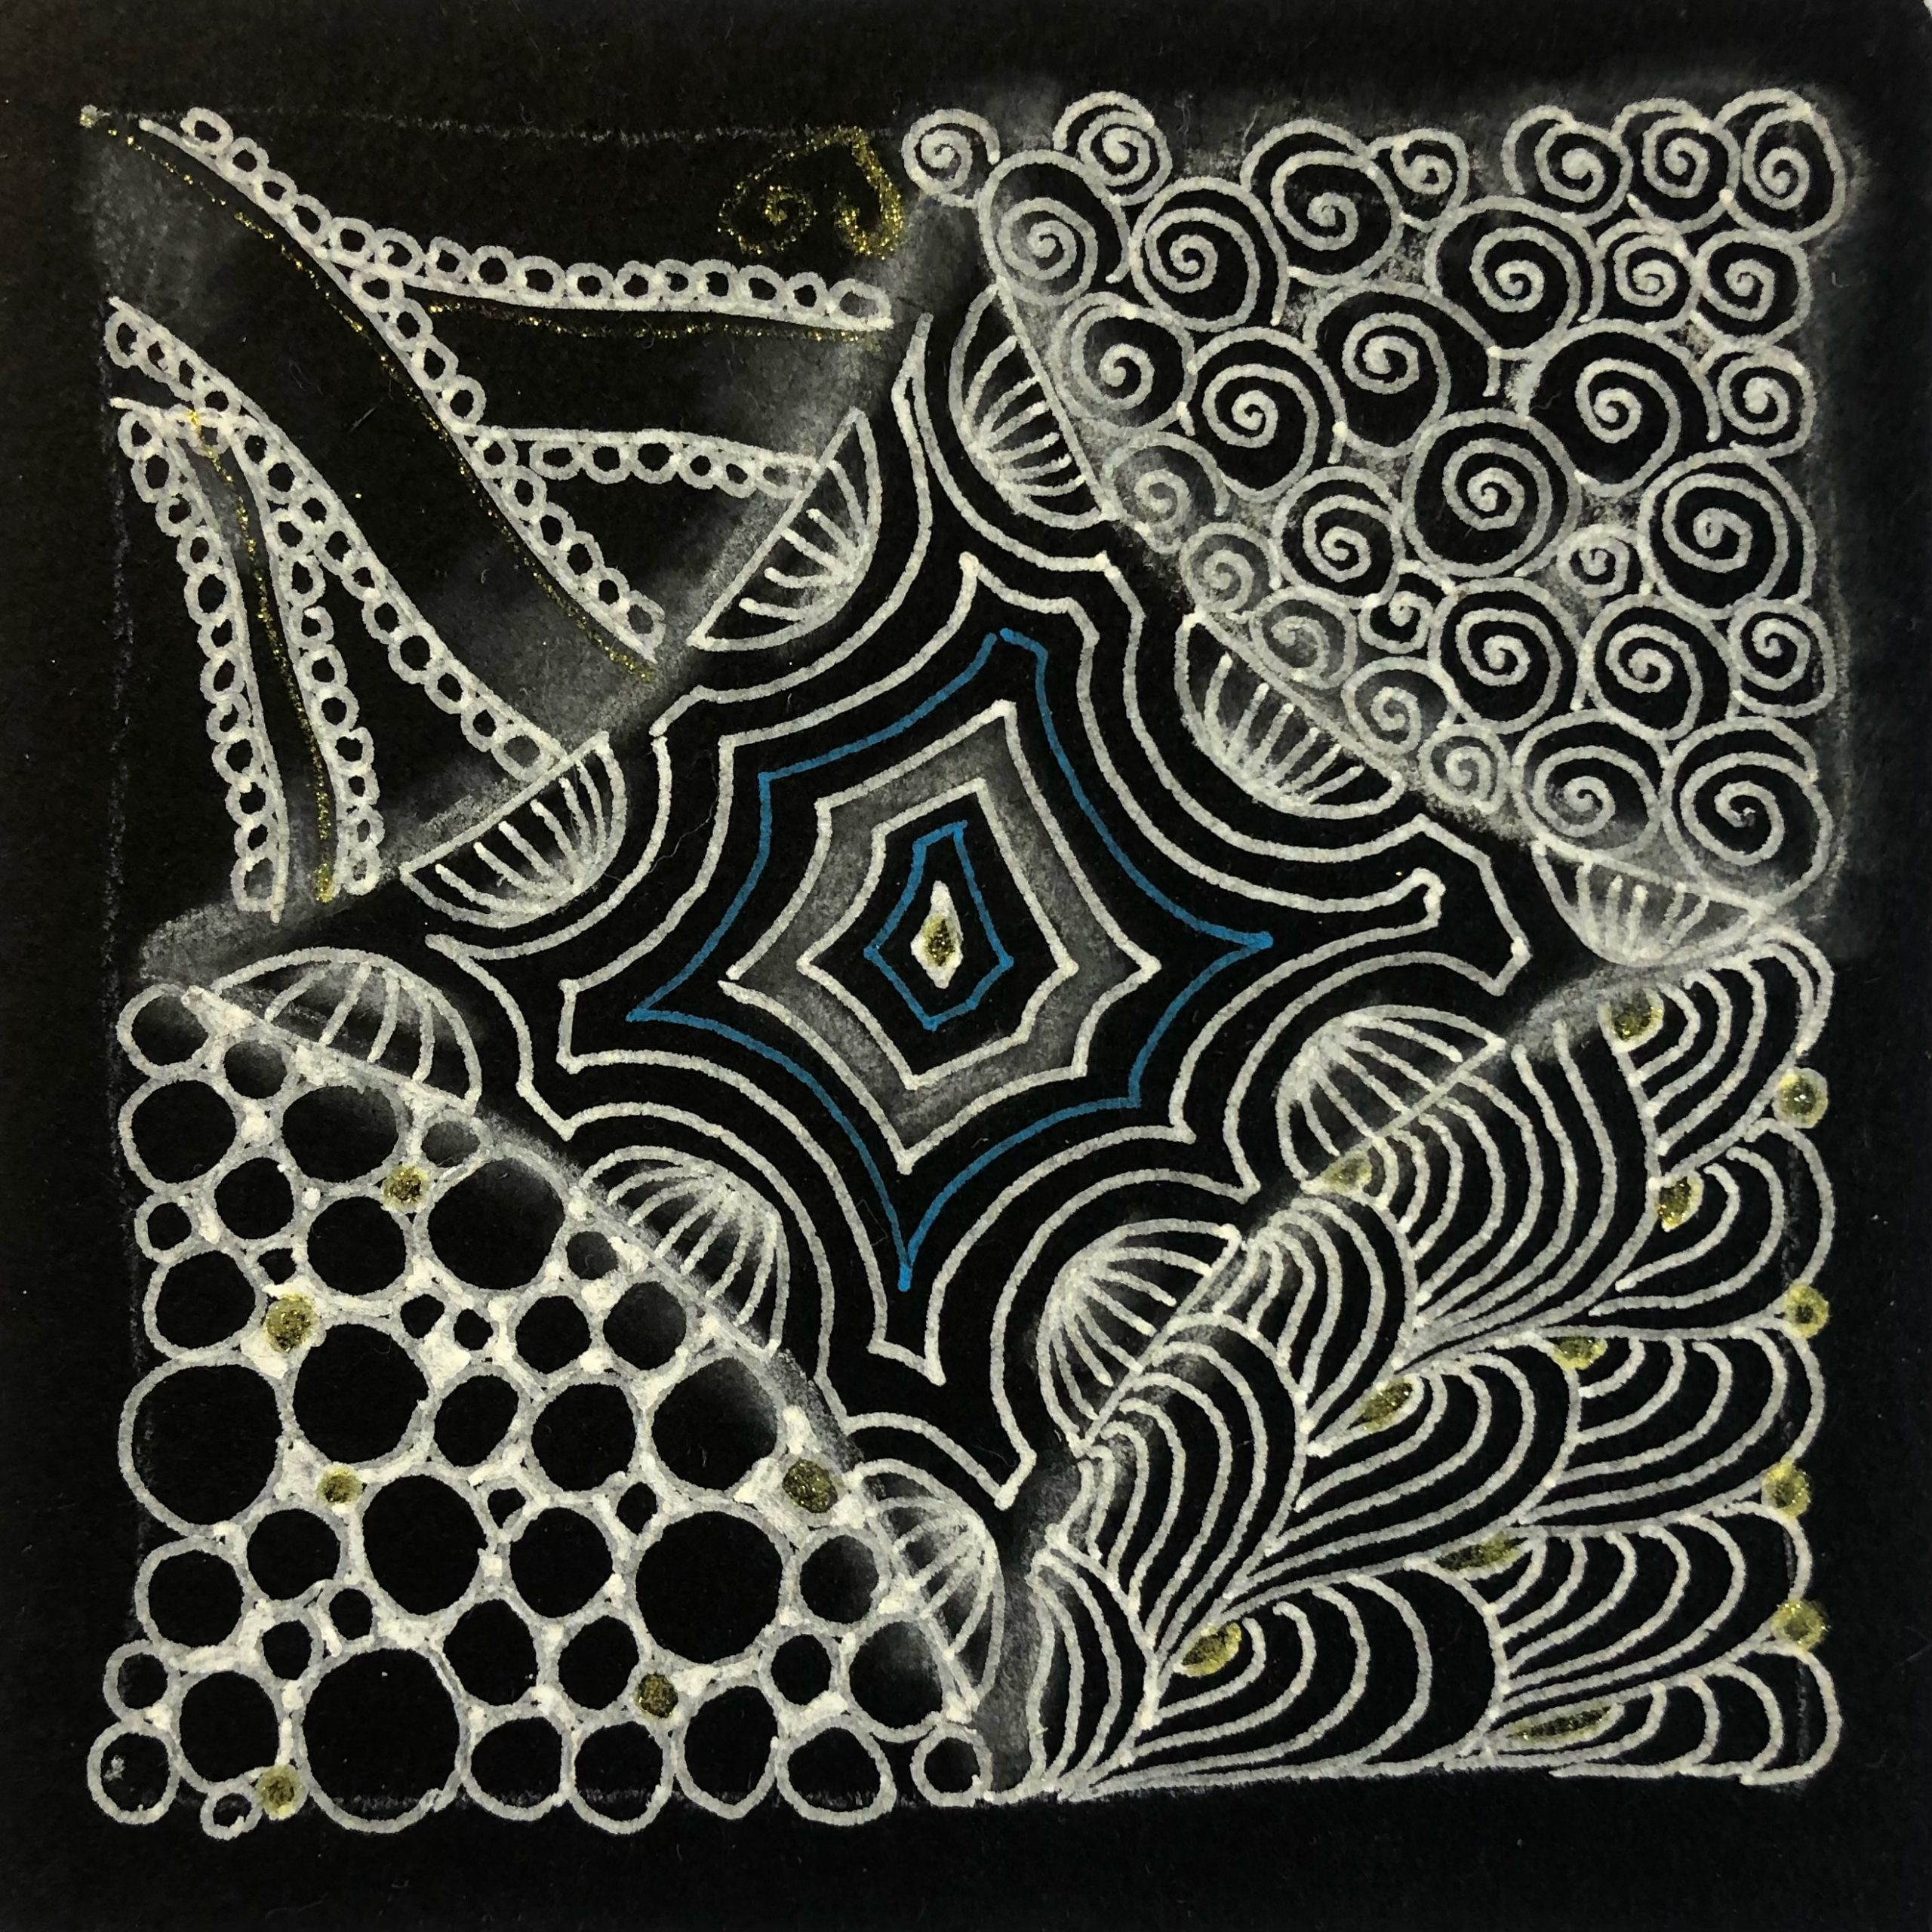 Zentangle Art - An Introduction to an Easy & Relaxing Drawing